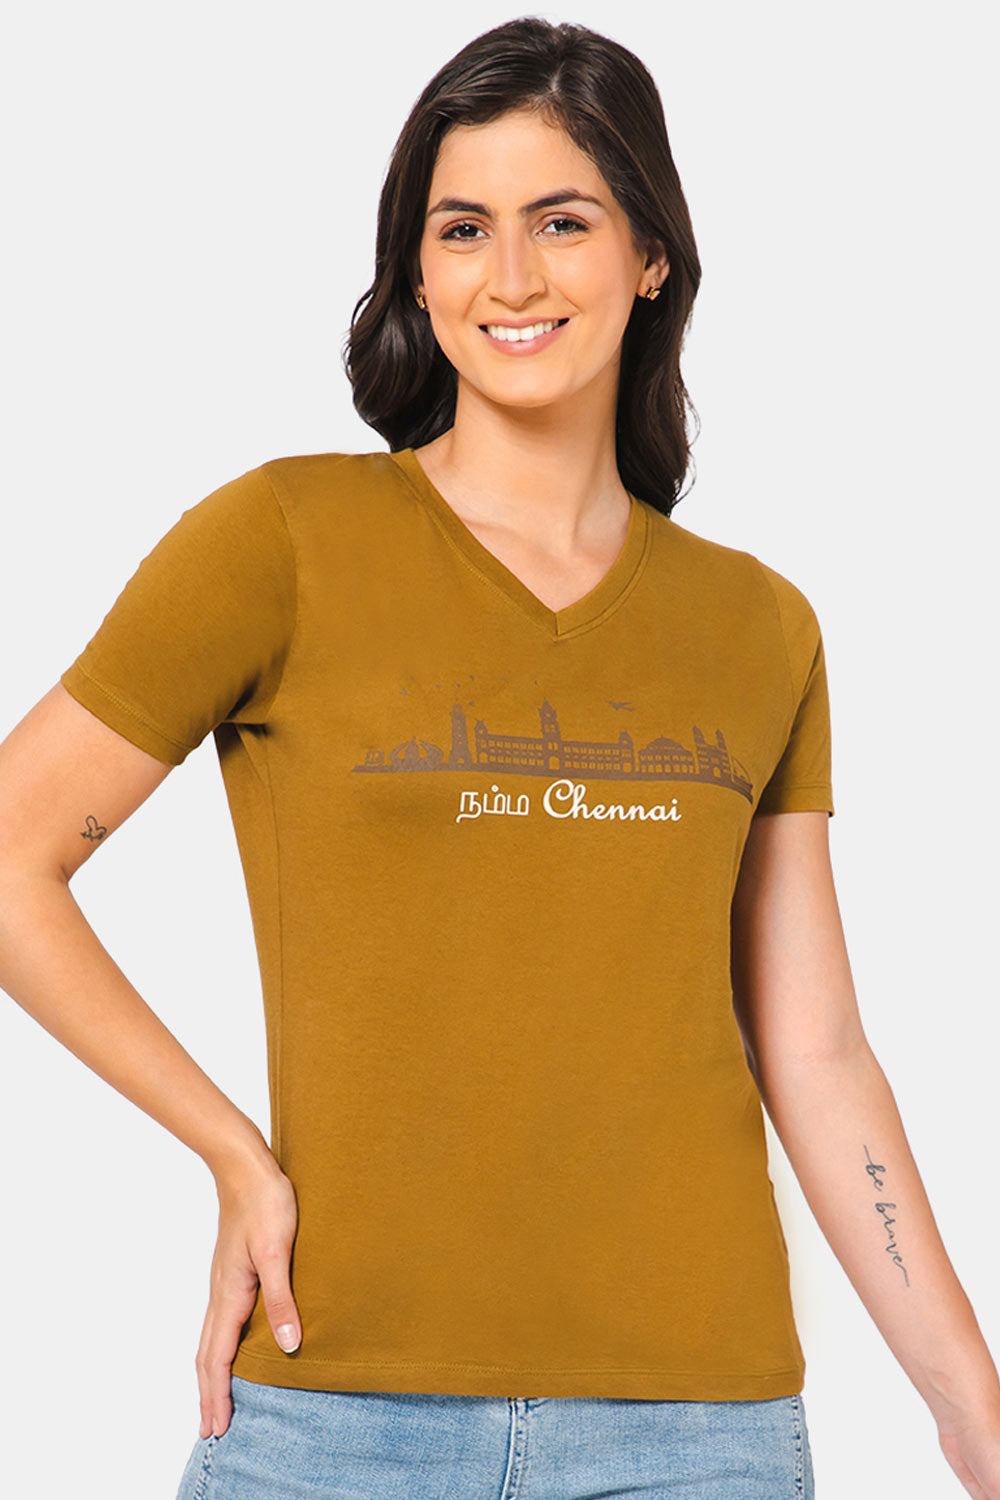 Fabulous and Comfortable Women's T-shirts Online